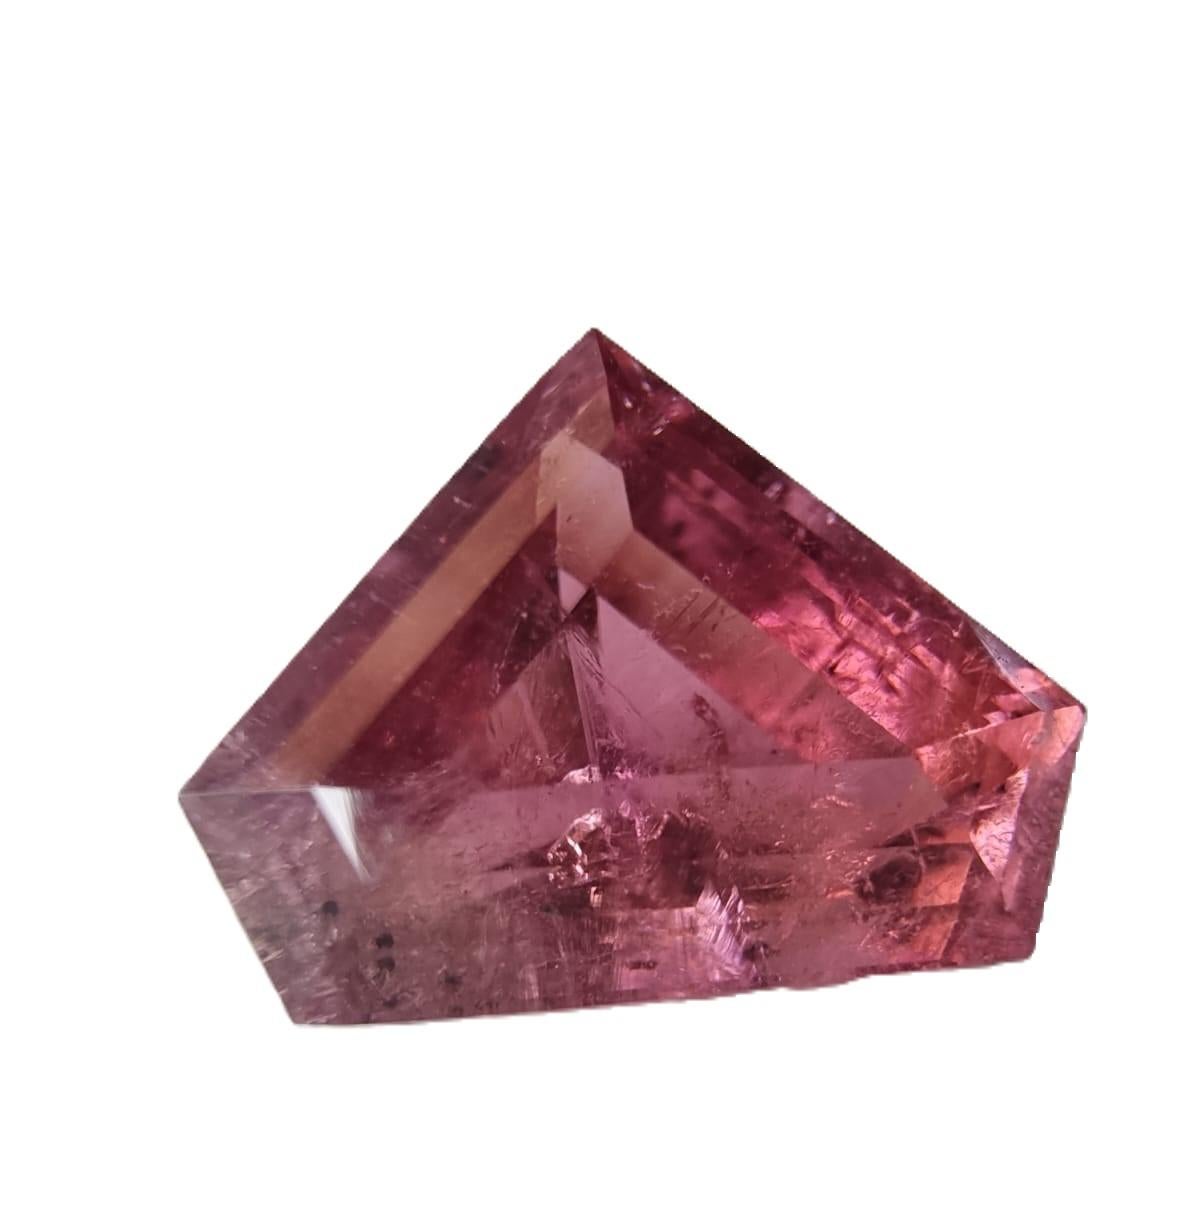 Immerse yourself in the enchantment of our exquisite 5.46ct Custom Cut Purple Red Rubellite Tourmaline Loose Gemstone. This gemstone boasts a rare Pentagon Cut, emphasizing its captivating Purple Red Rubellite Tourmaline variety.

Detailed